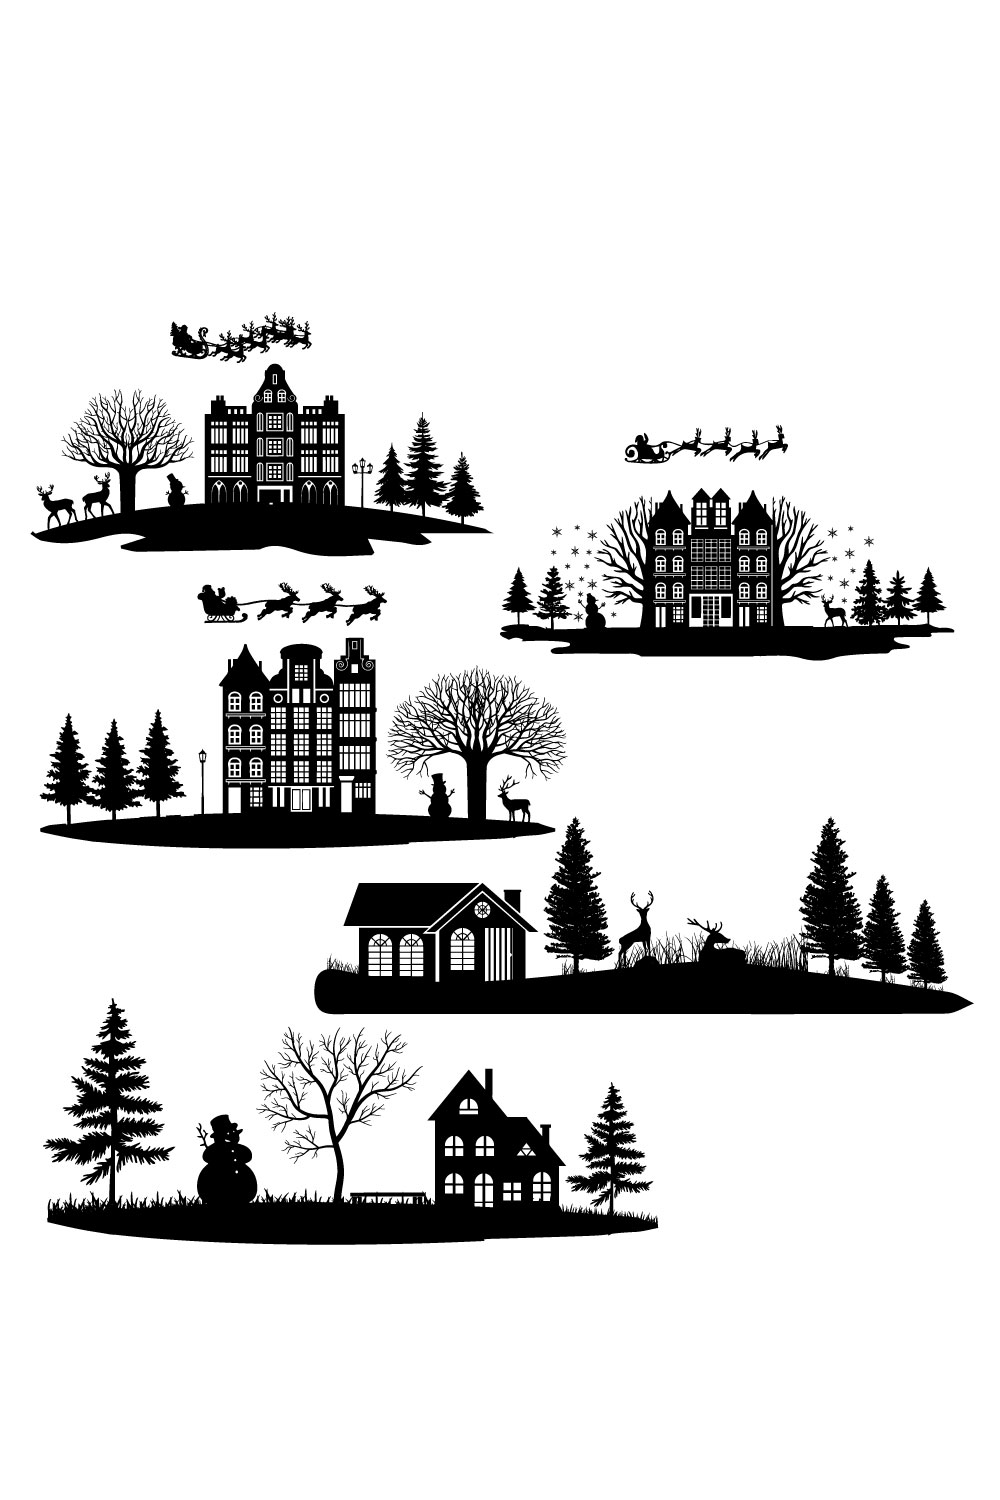 Collection of amazing images of Christmas houses silhouettes